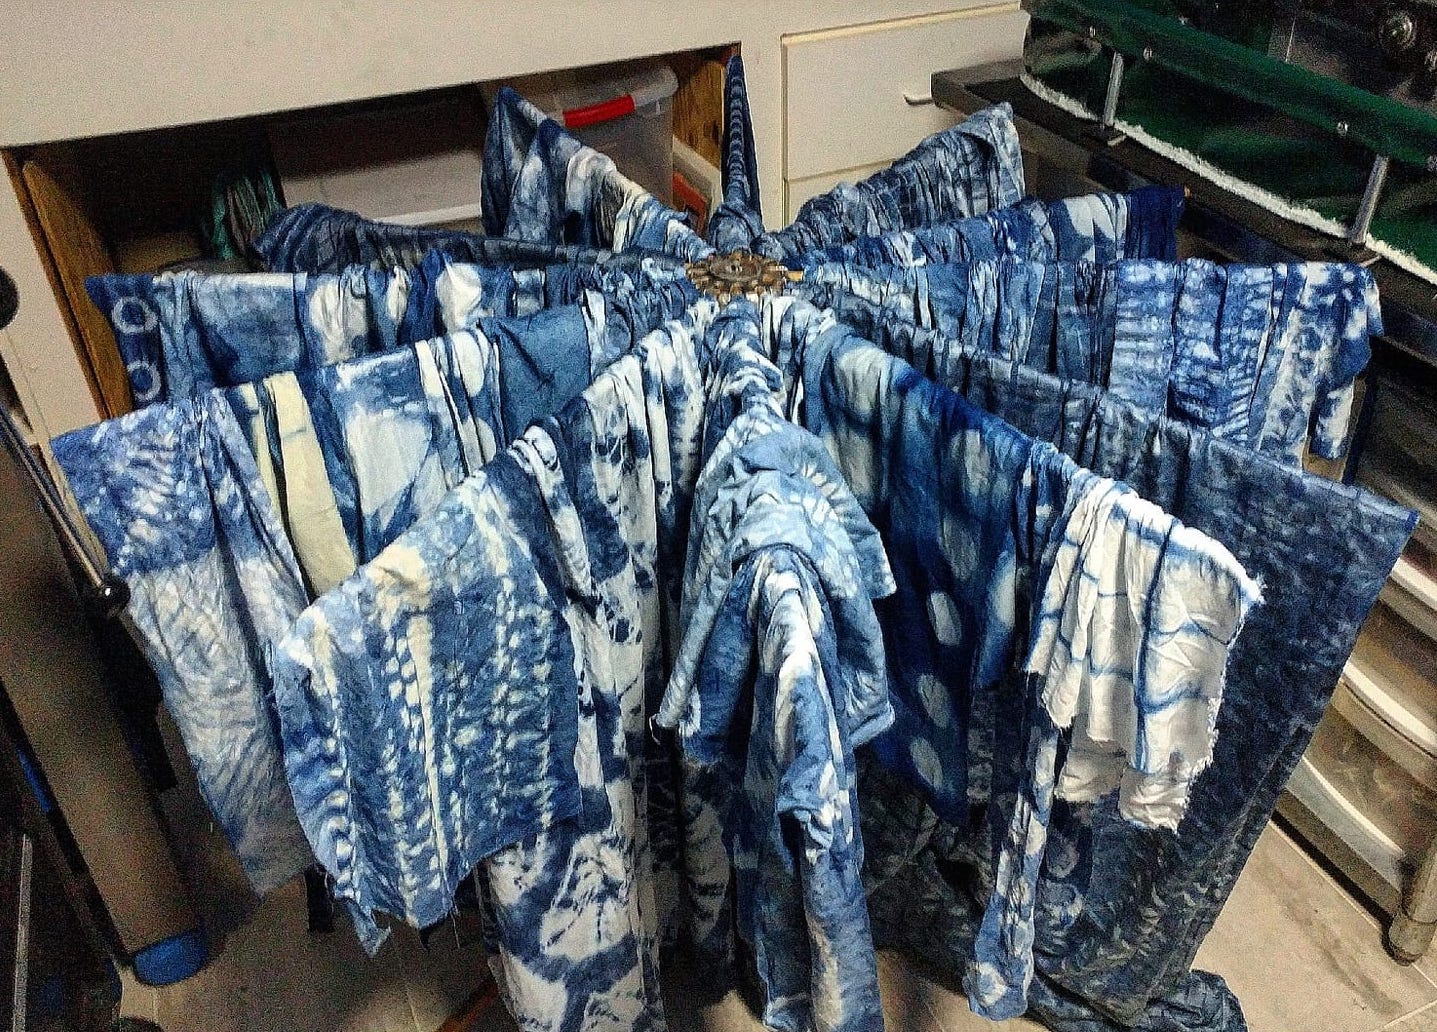  Over fifty pieces of shibori-dyed fabric drying. 